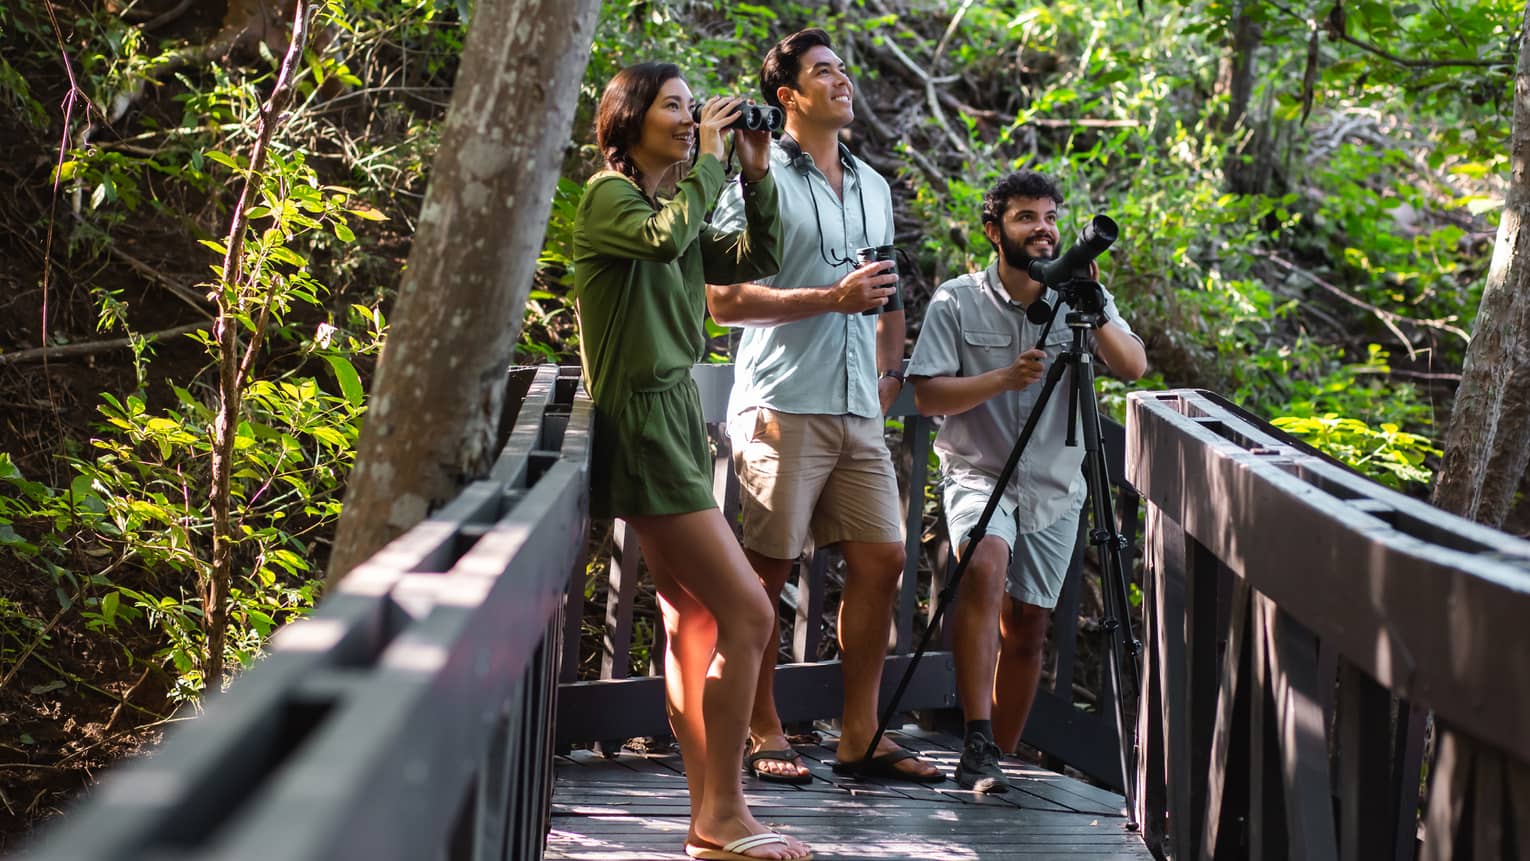 A woman holding binoculars, a man holding a recorder and a guide holding a camera on a tripod are gathered on a wooden forest walkway for bird watching